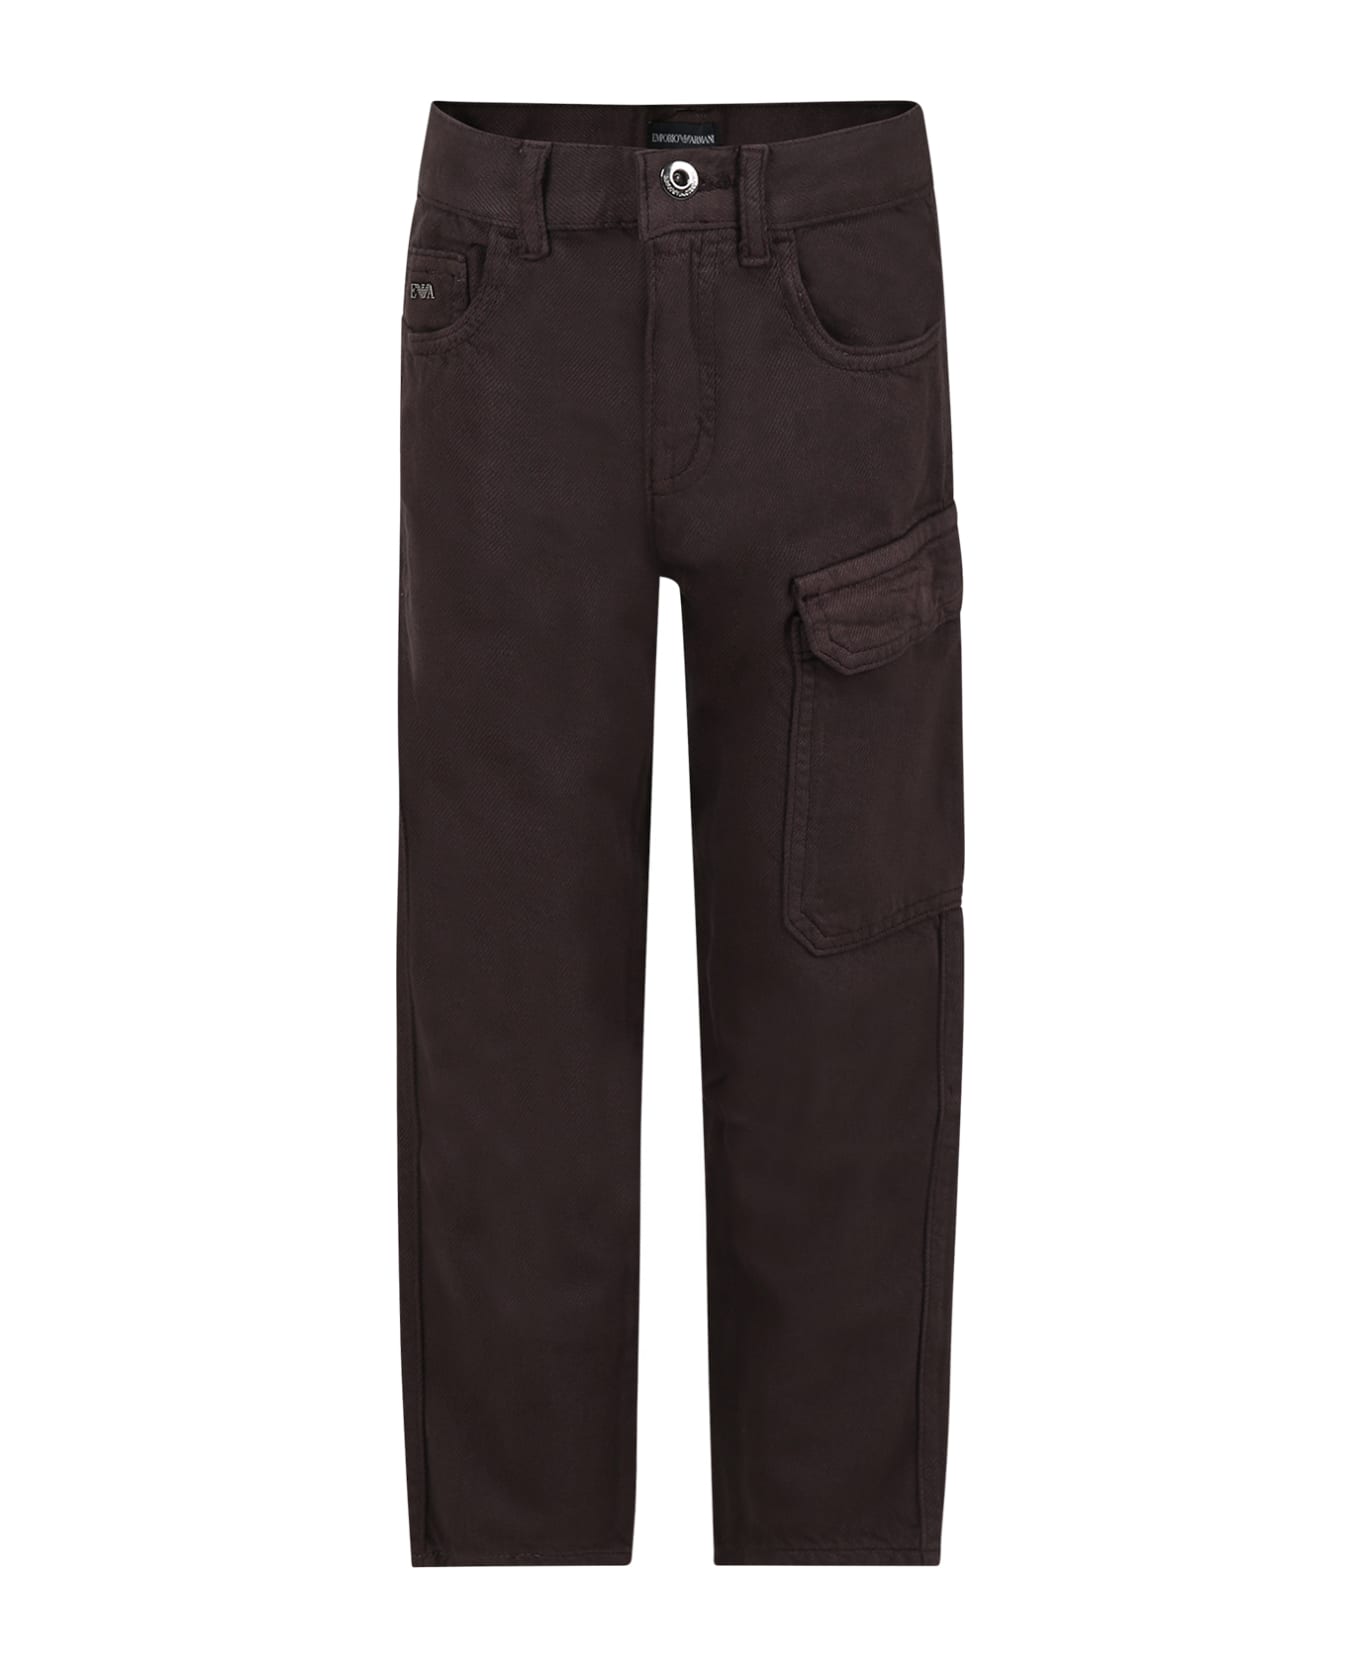 Emporio Armani Brown Trousers For Boy With Eagle - China Ting